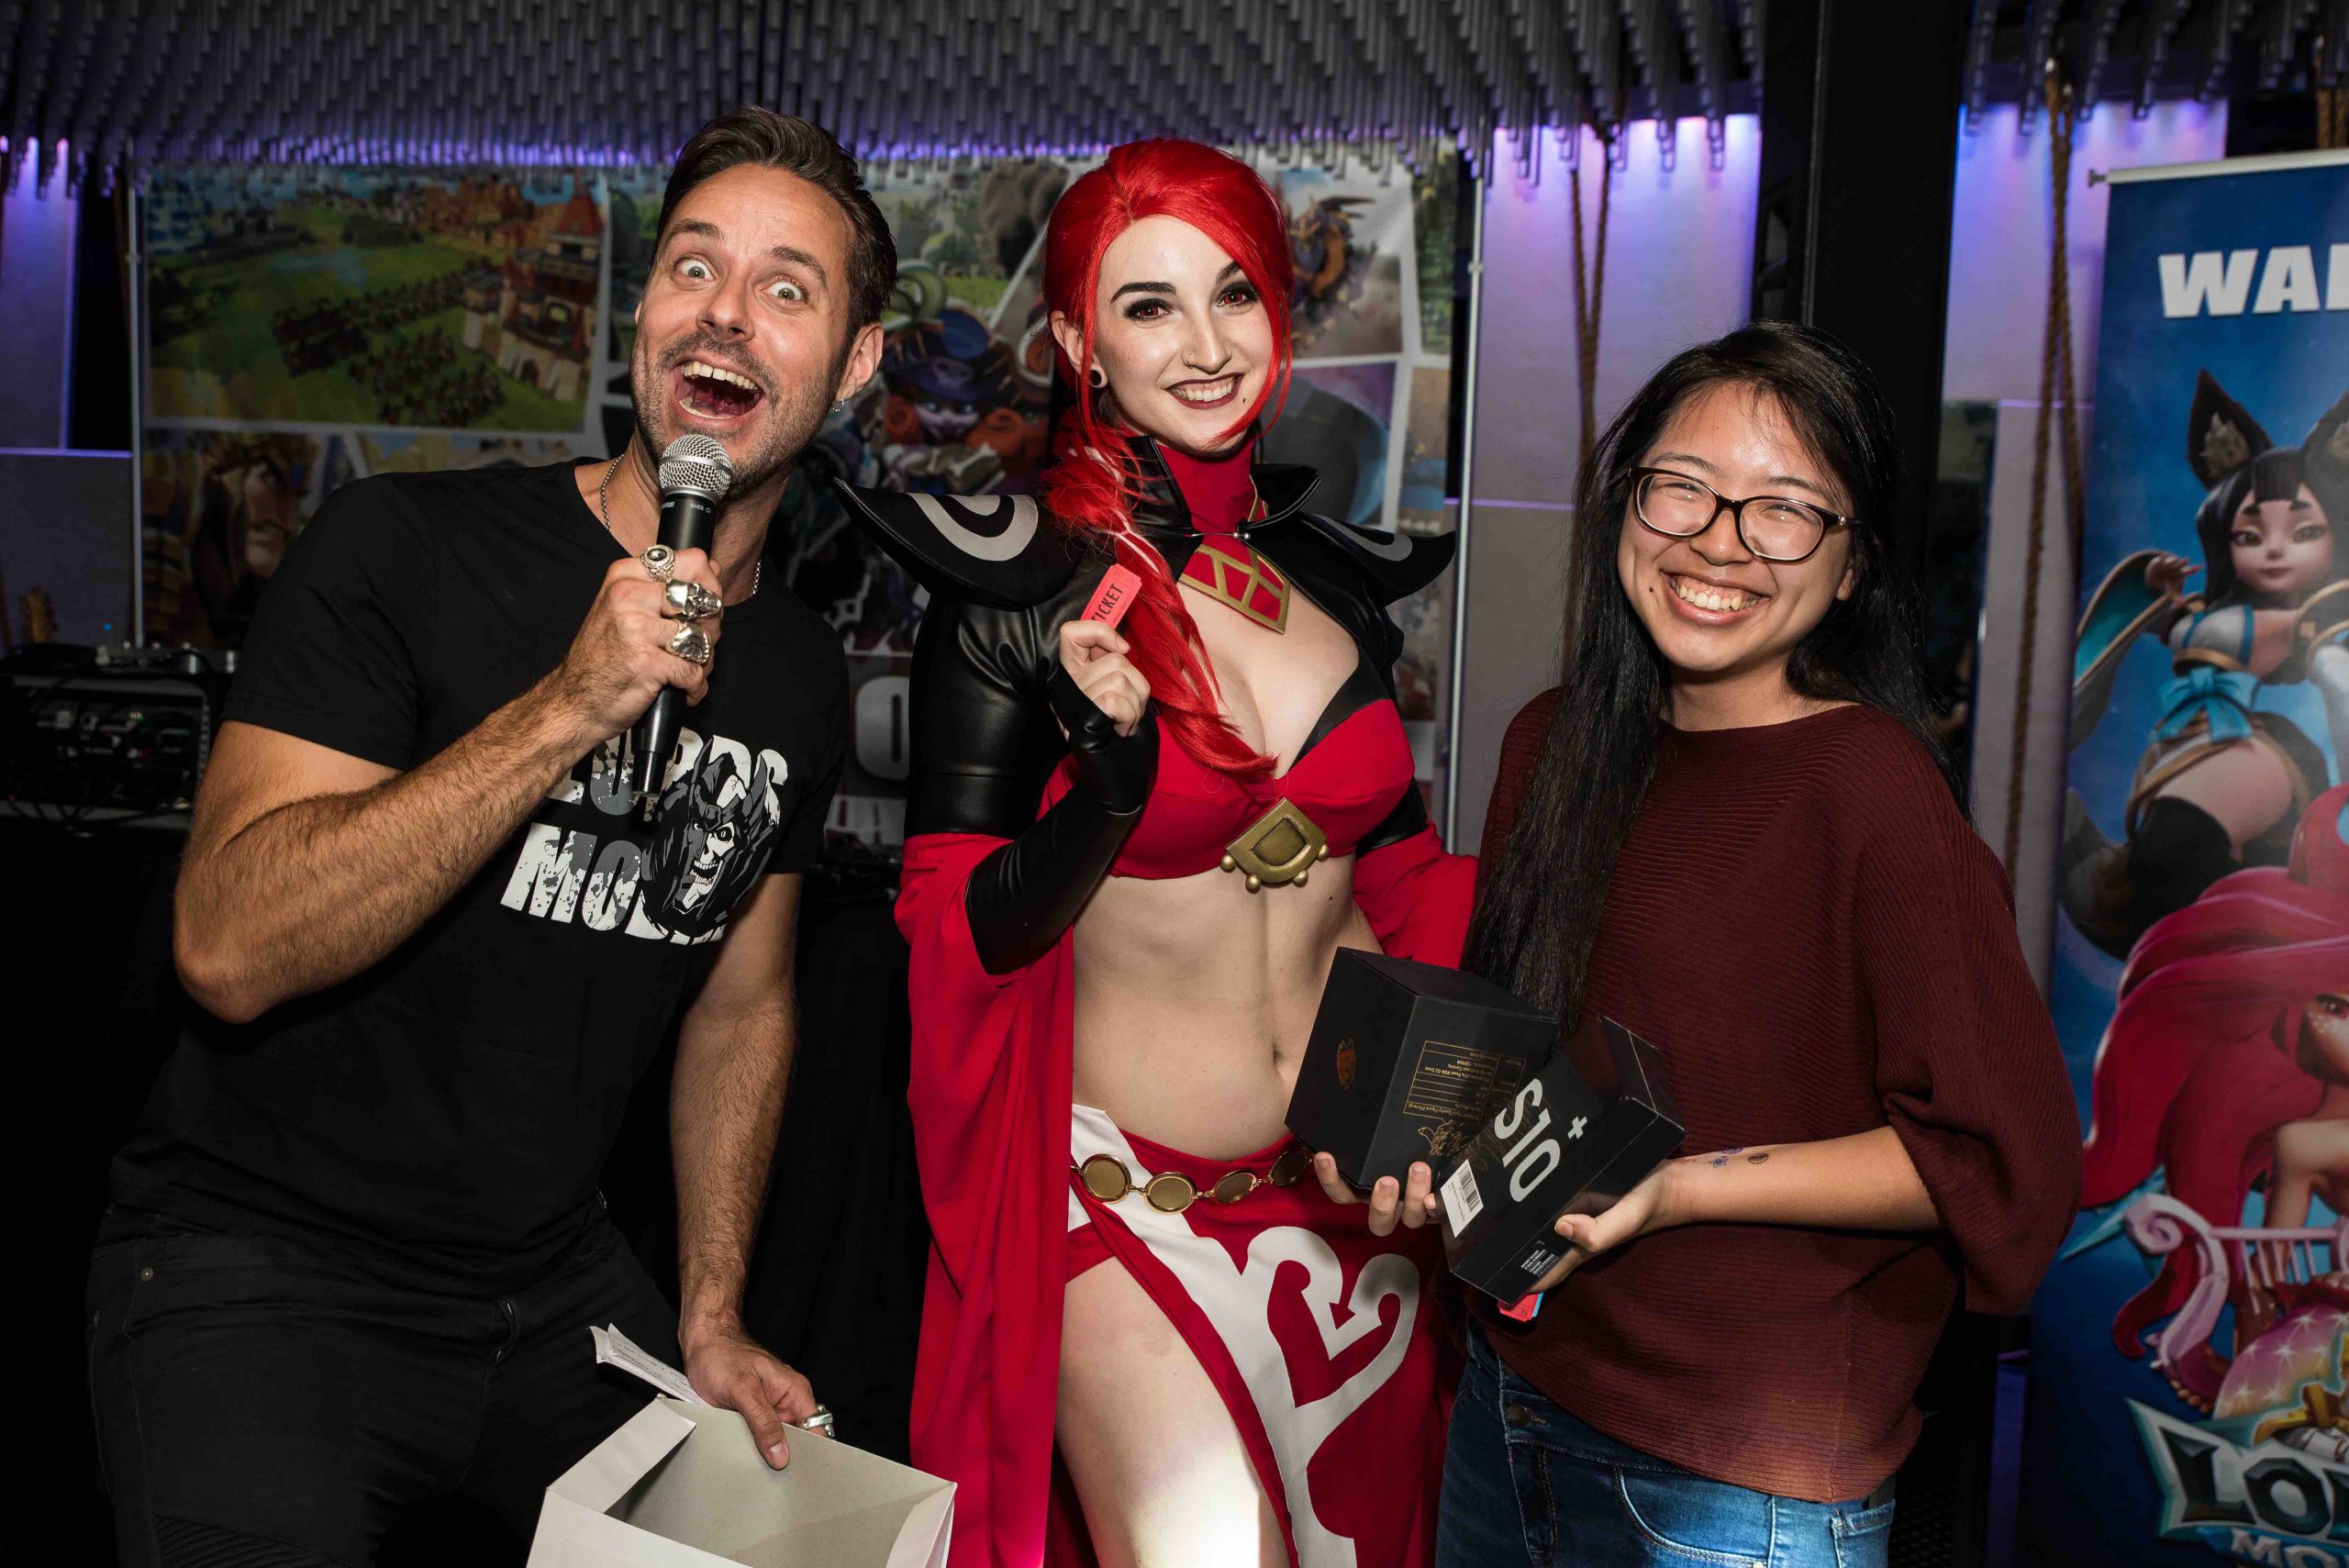 IGG Celebrated Lords Mobile With Lords Fest This Weekend in LA, and it Was a Blast